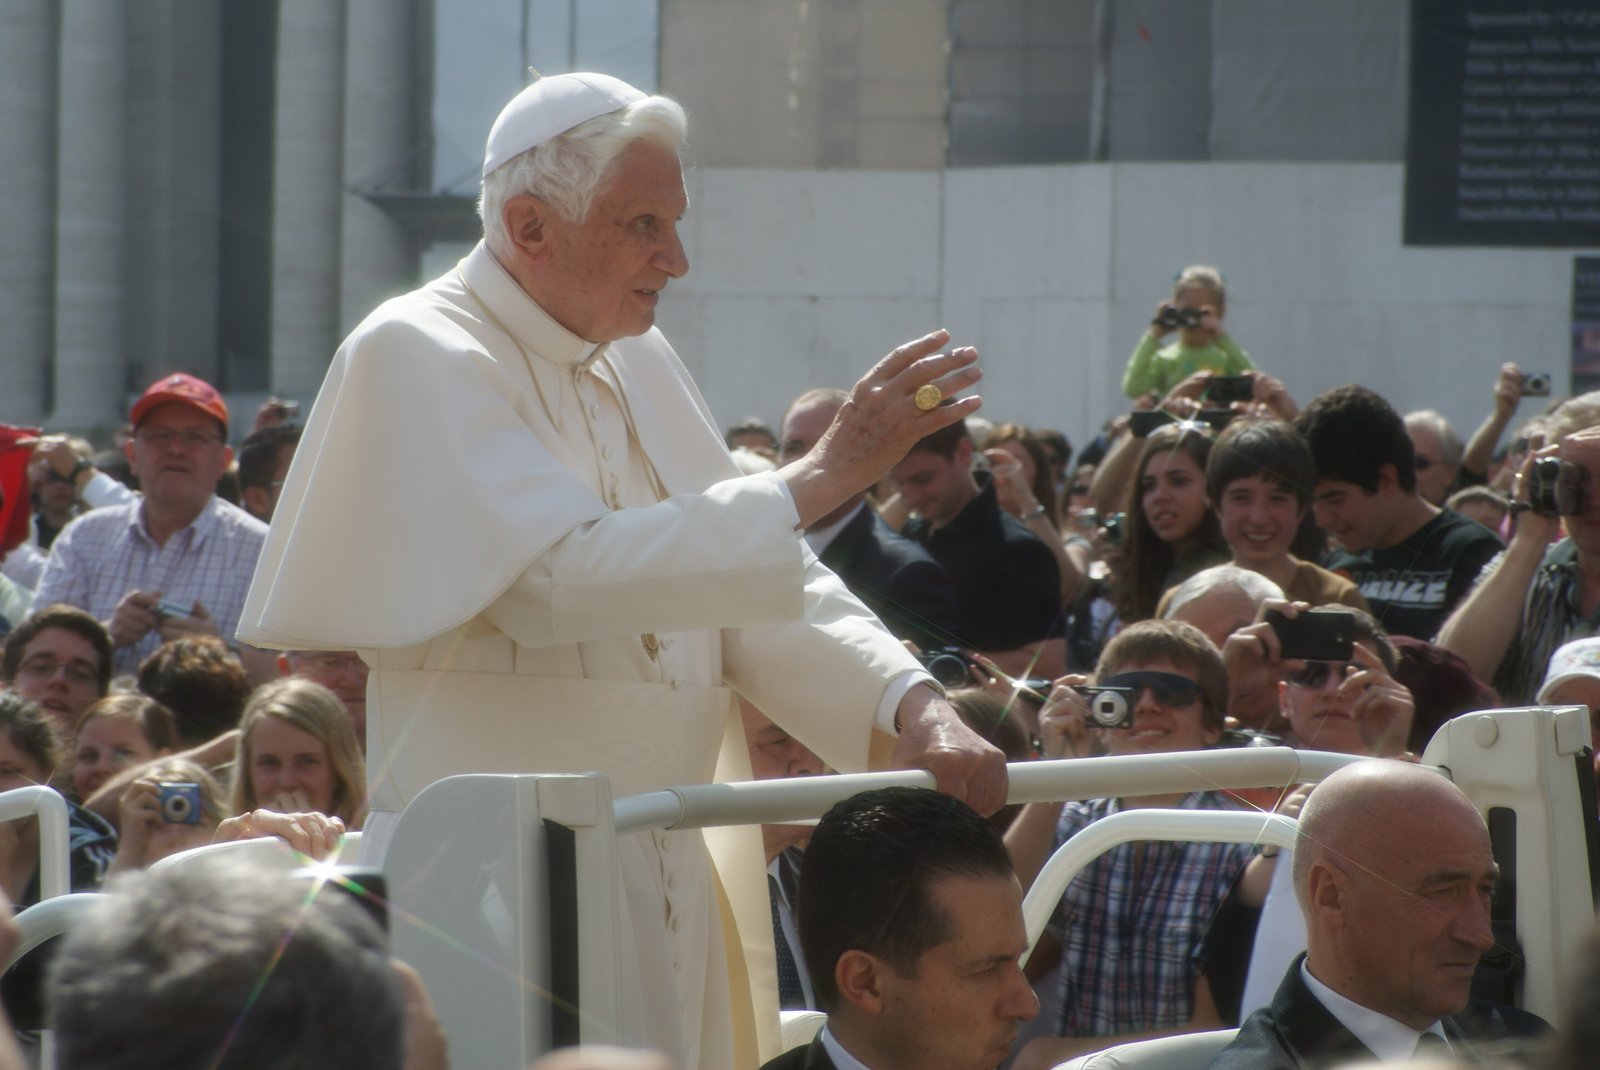 Pope Benedict XVI in Rome, Italy during an outdoor service